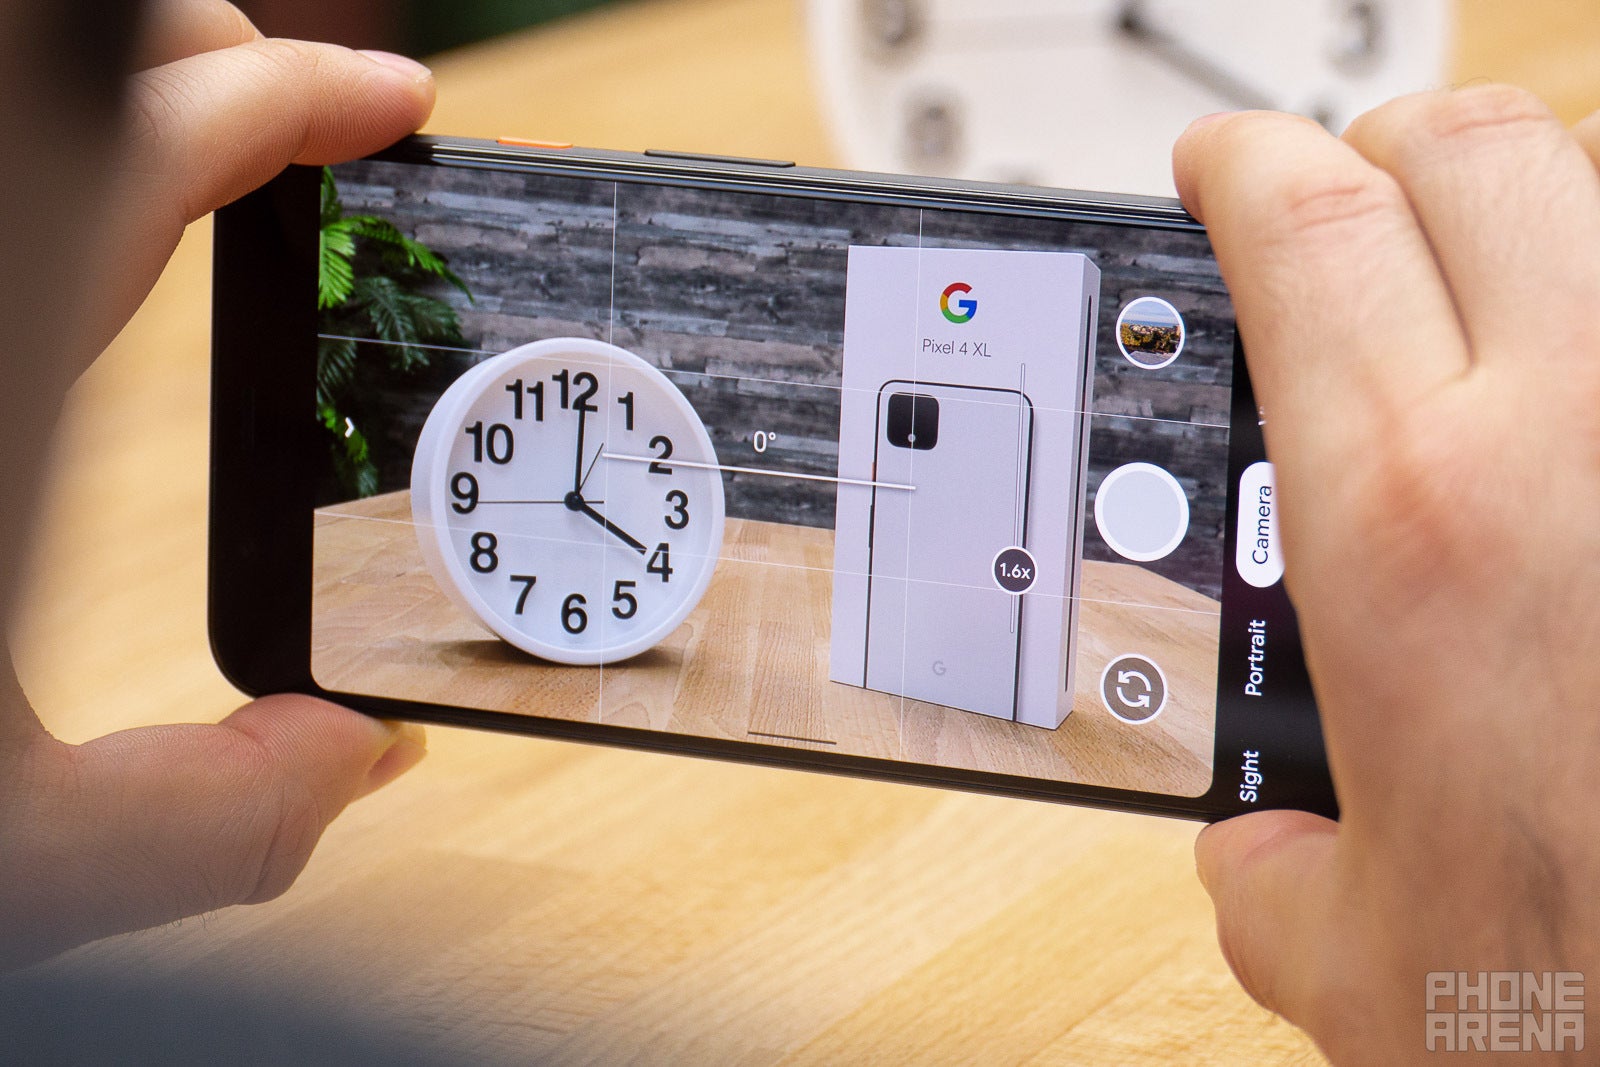 The Google Pixel 4 camera takes great photos, but a super wide-angle lens is missing - Google Pixel 4 XL review 4 months later: is it worth getting one in 2020?